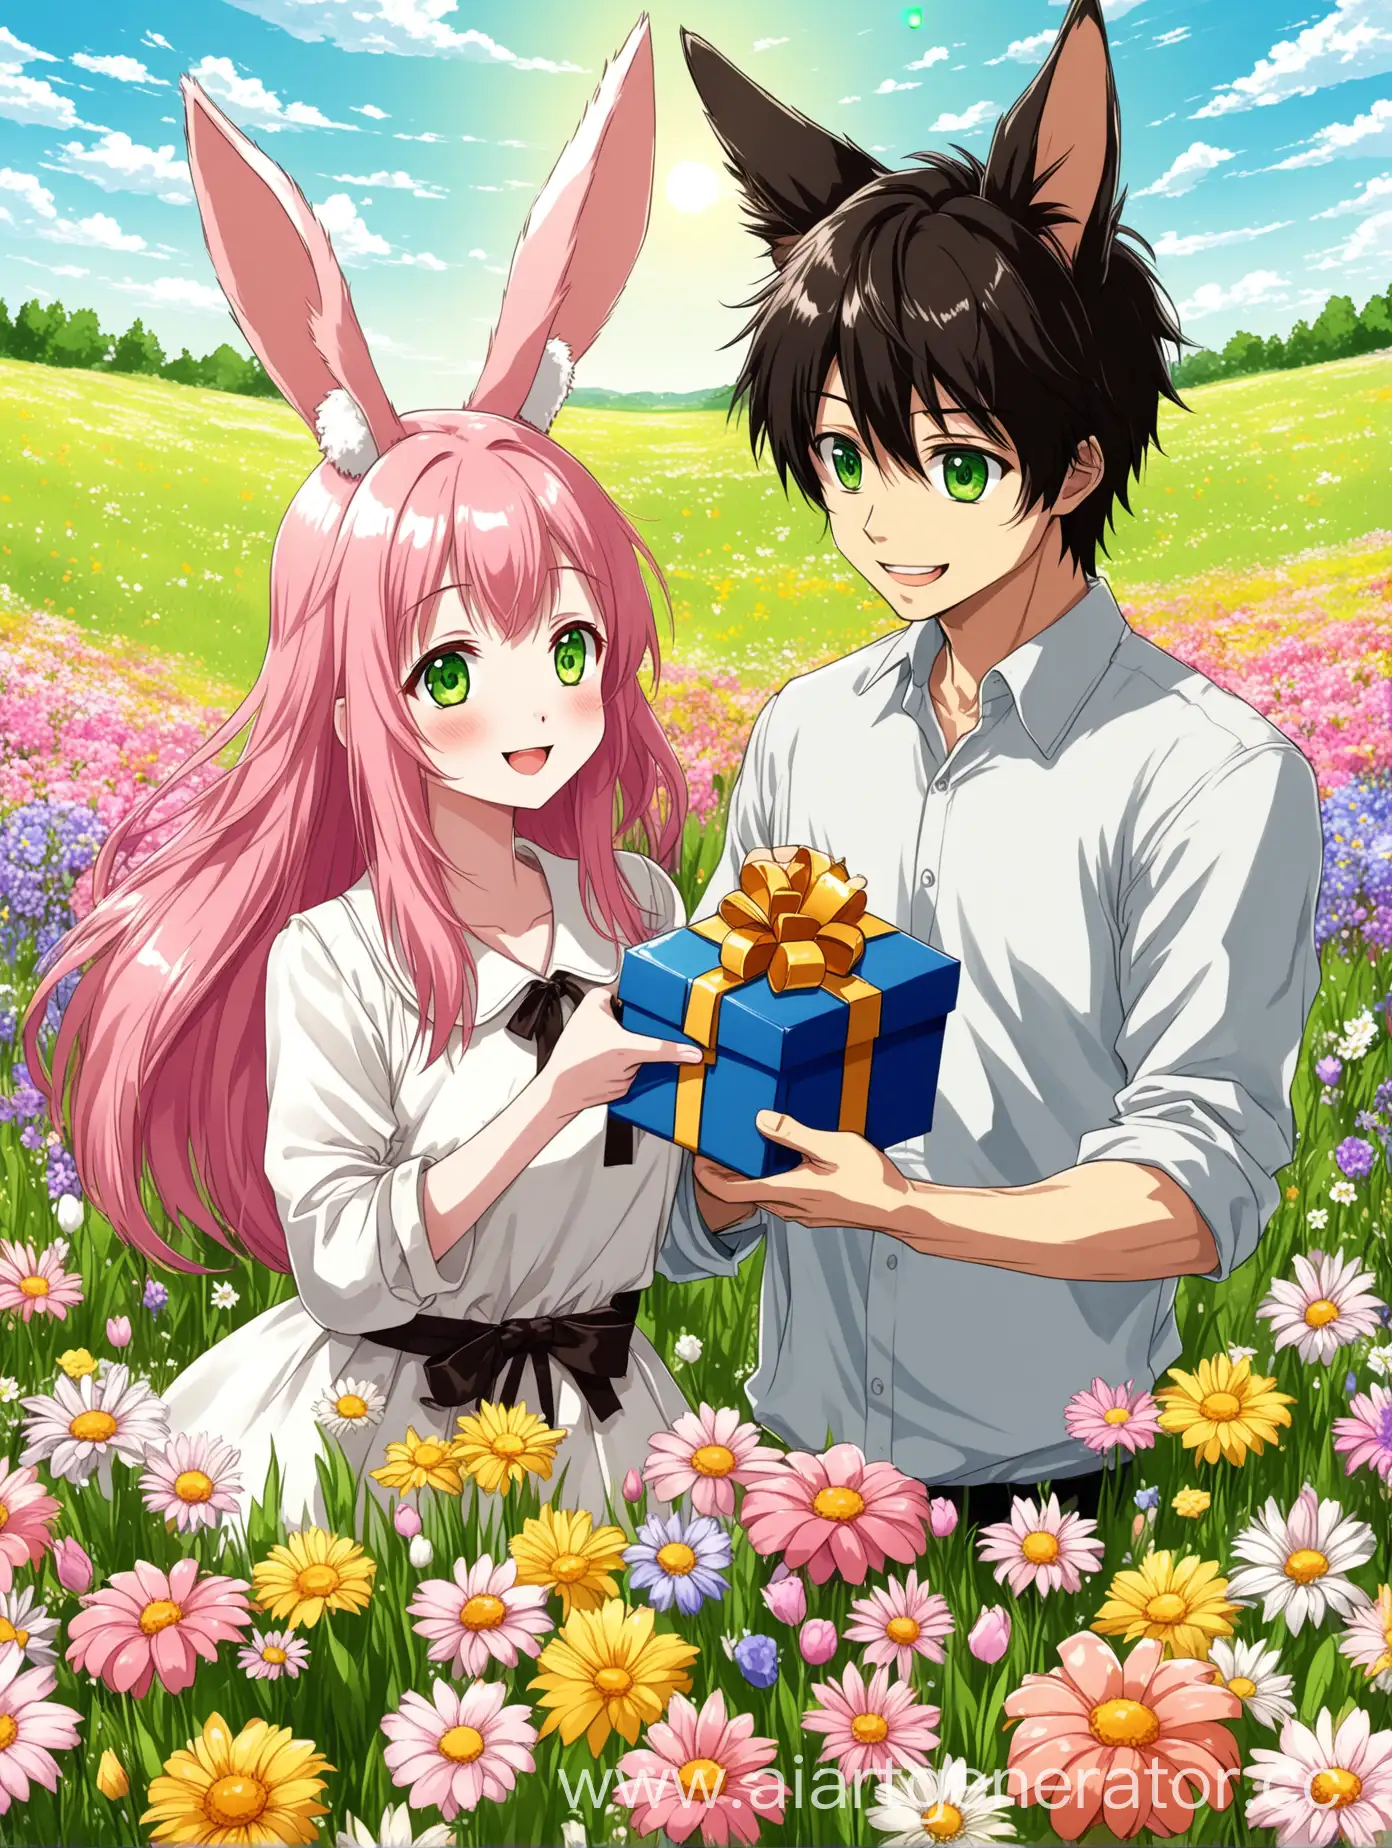 Adorable-Anime-Rabbit-Girl-Congratulates-FoxEared-Guy-on-Birthday-in-Flower-Field-with-Gift